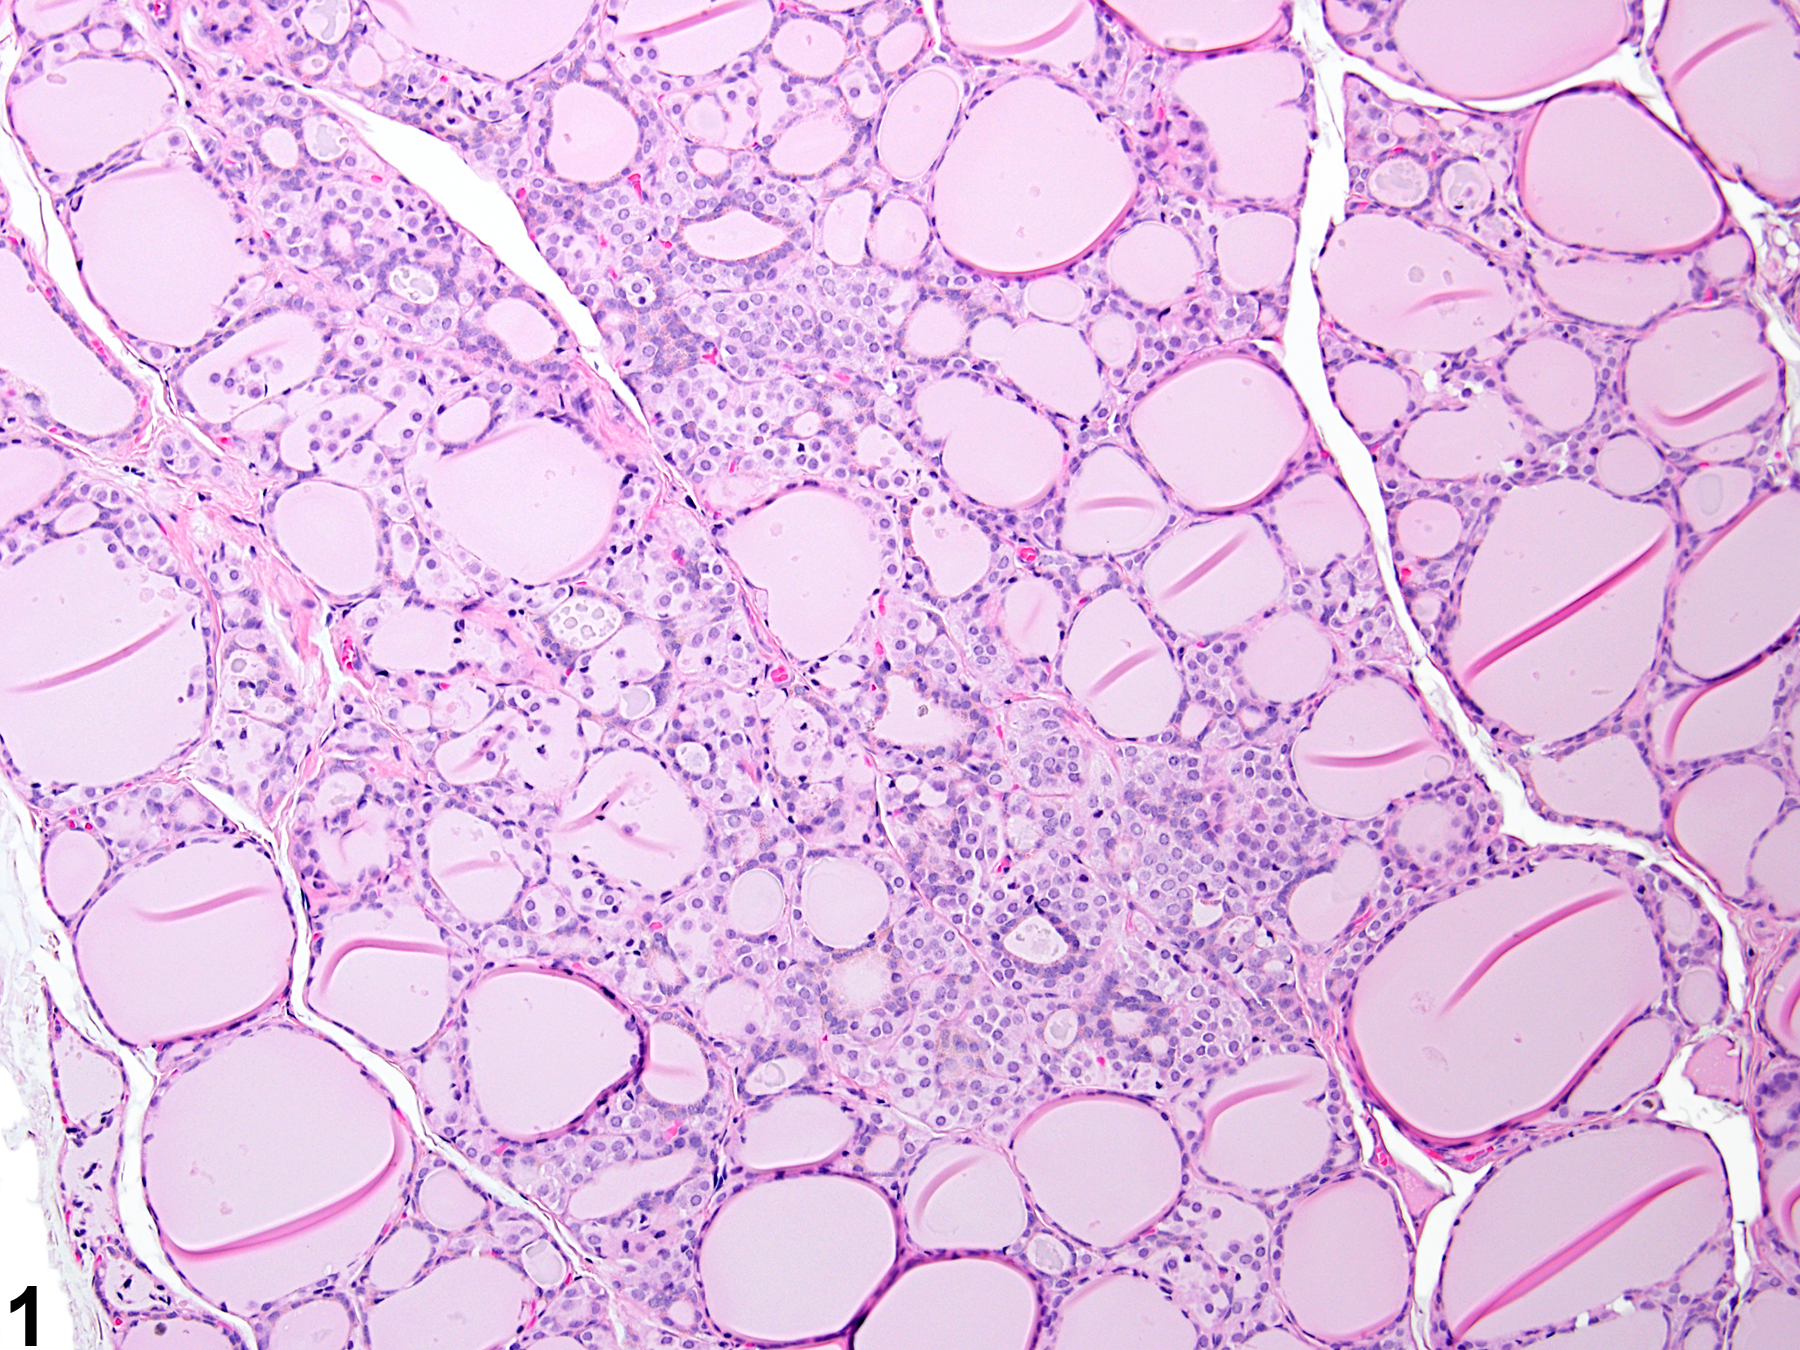 Image of C cell hyperplasia in the thyroid gland from a female F344/N rat in a chronic study